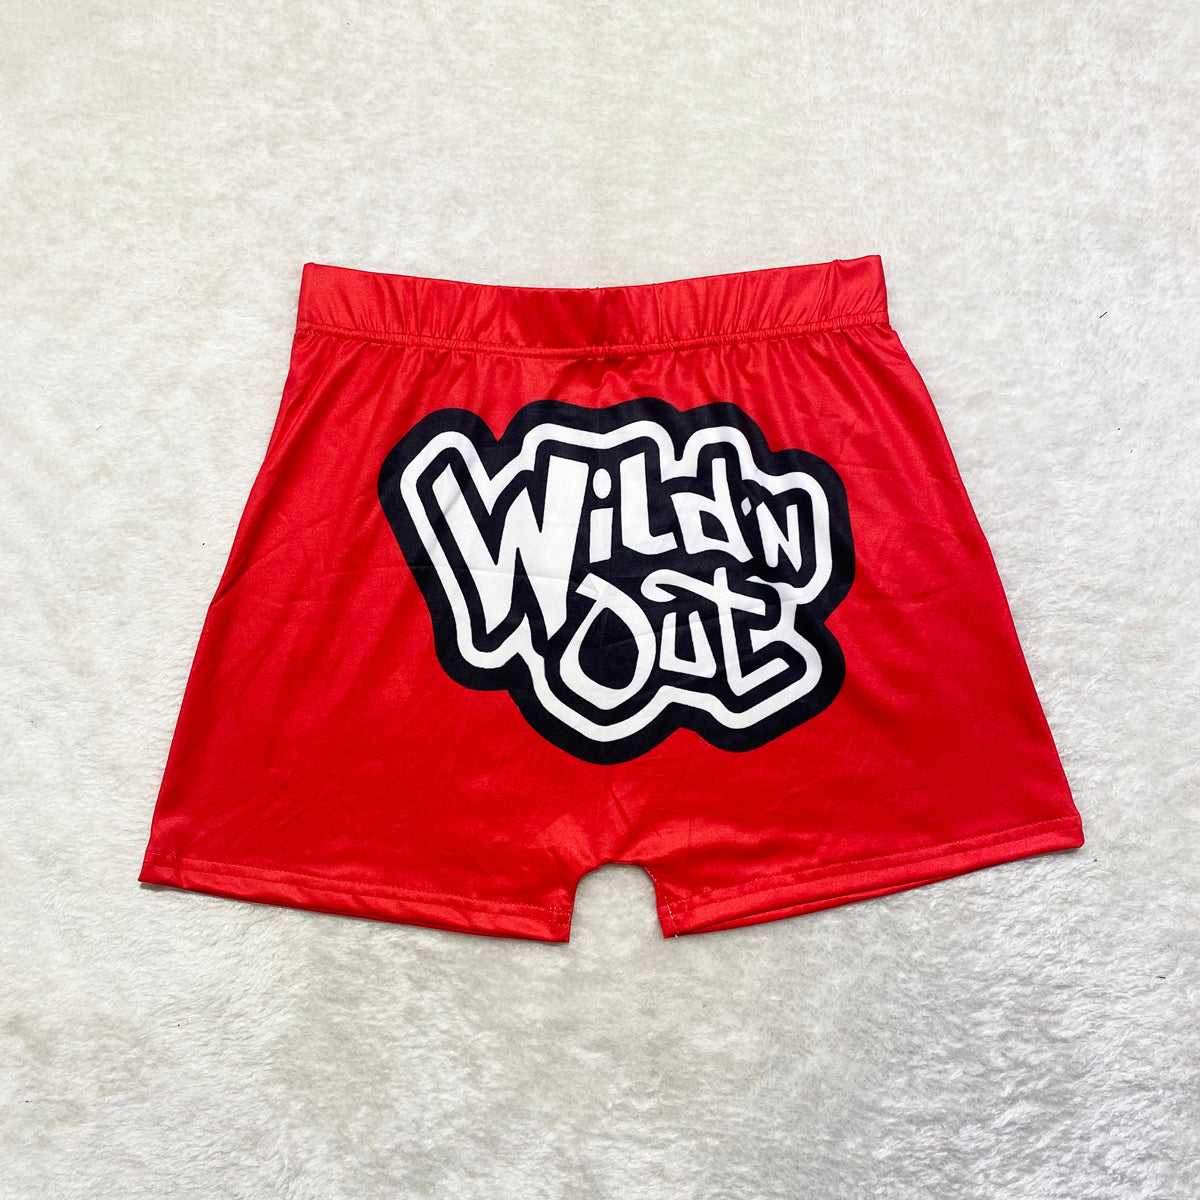 “Wild’n Out” Shorts